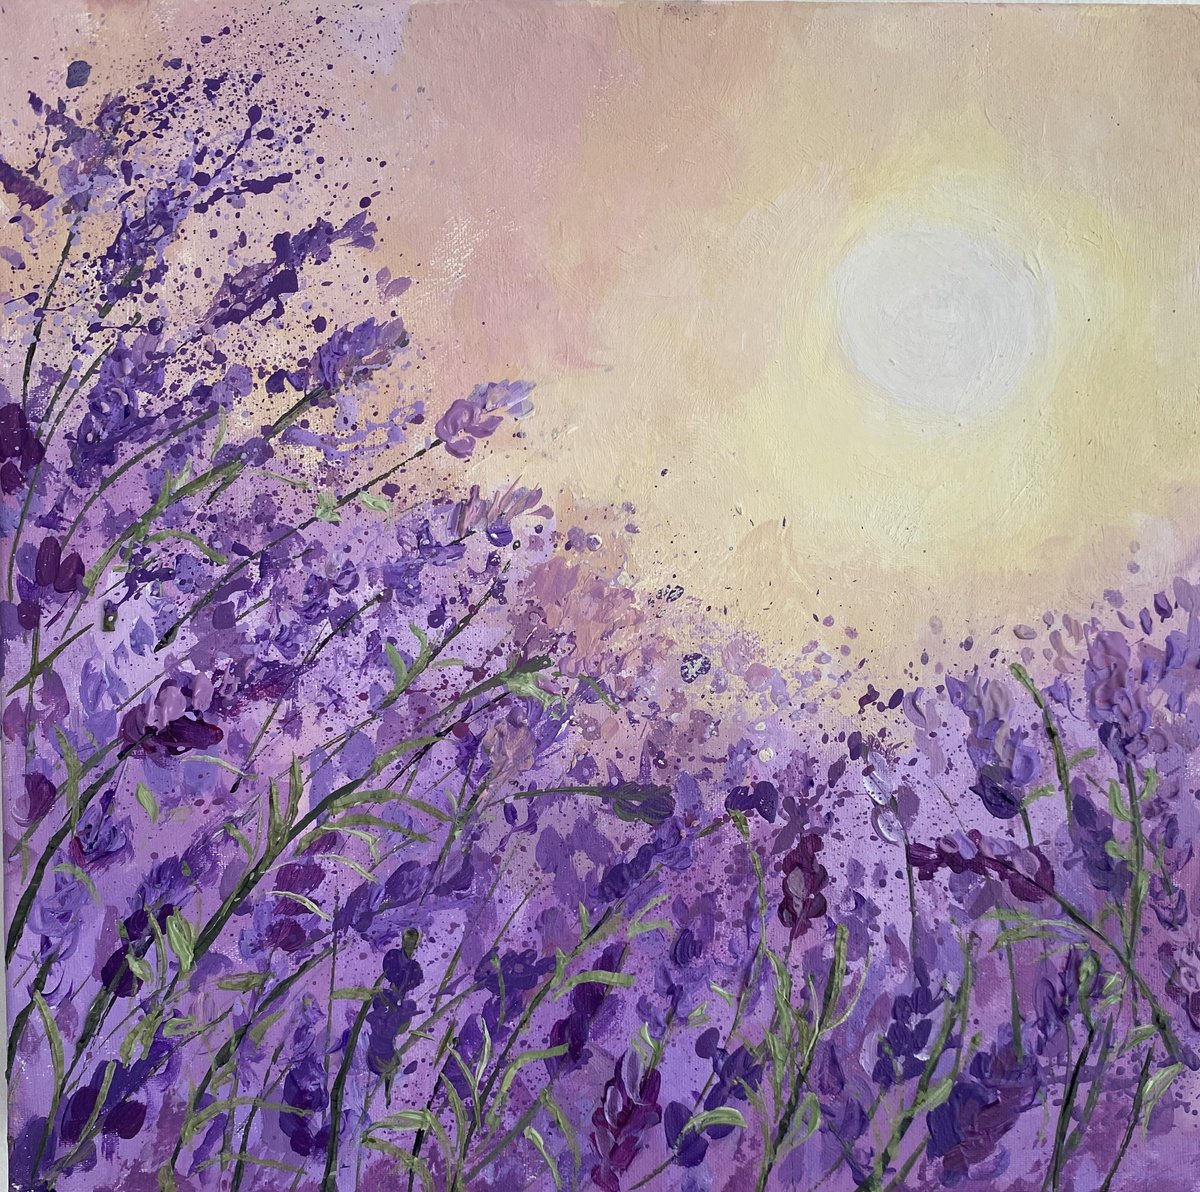 Lavender Dream 1 by Colette Baumback